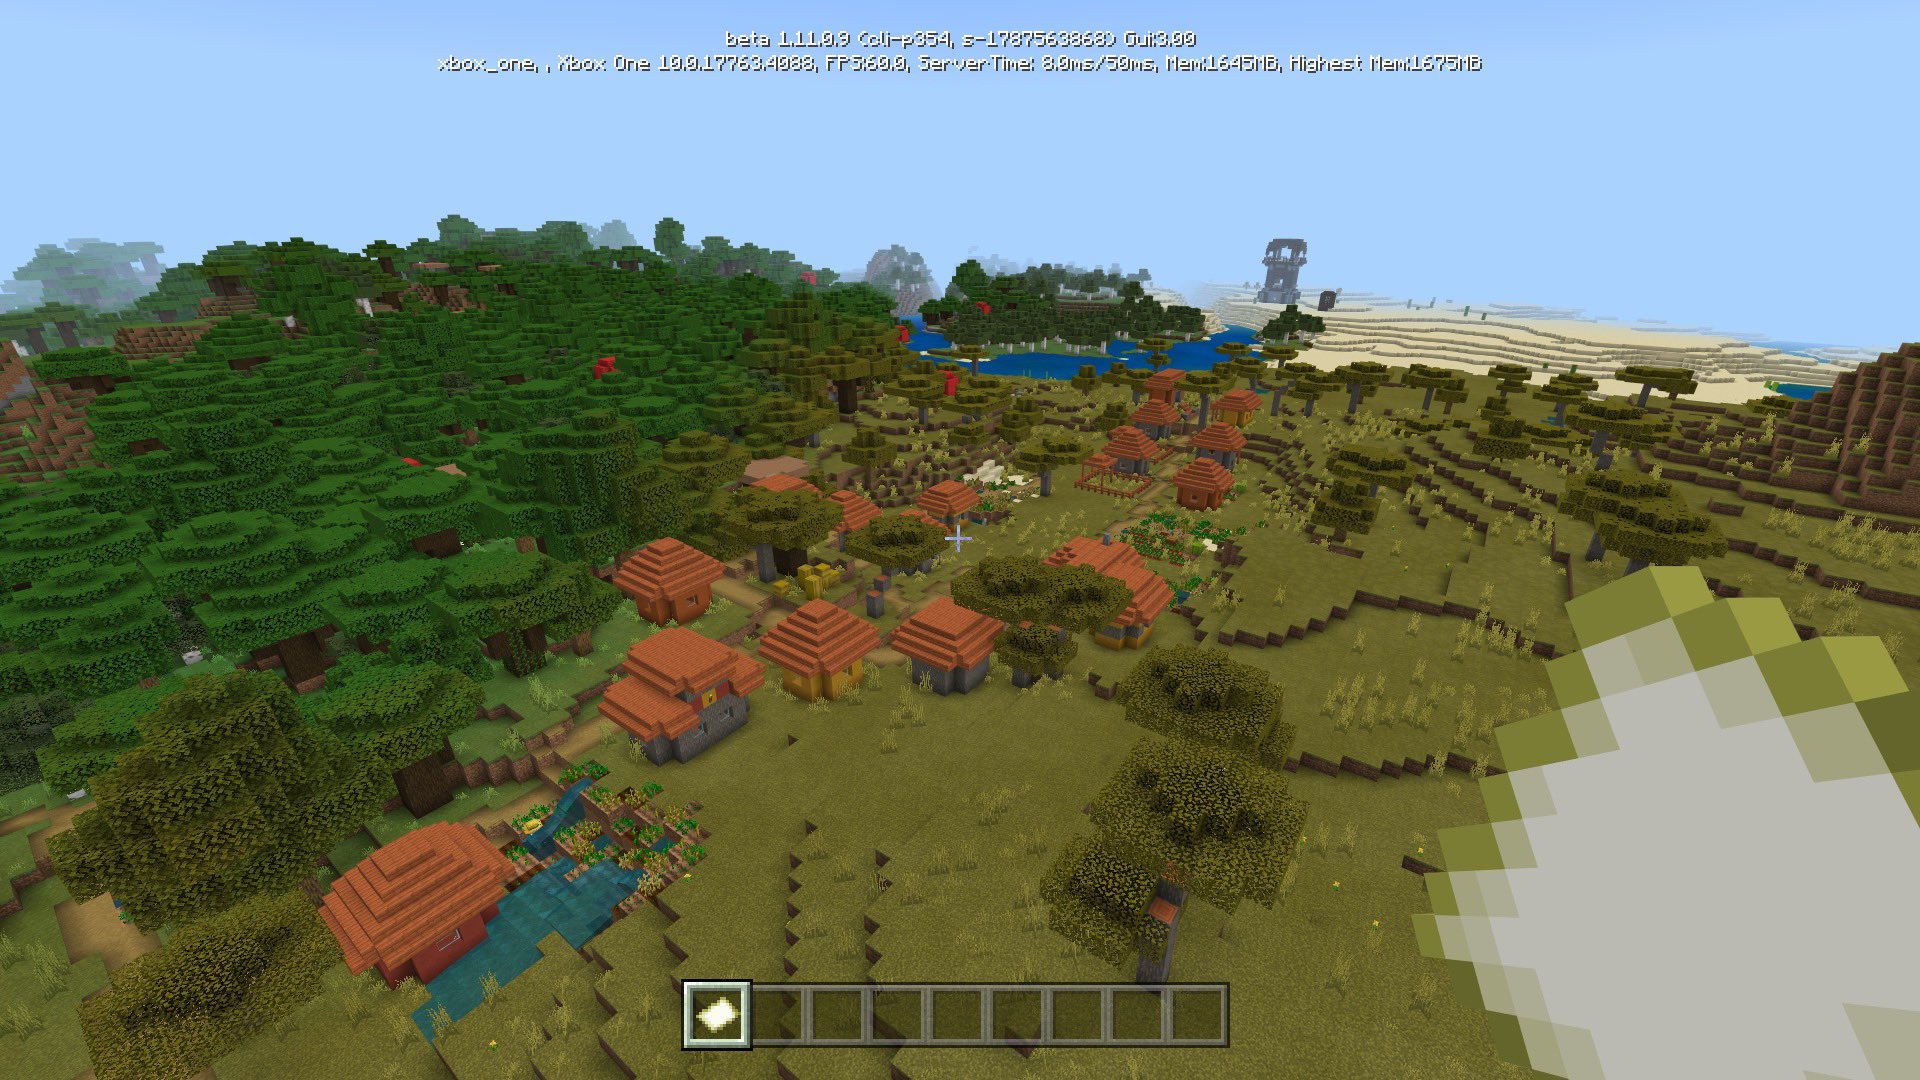 Minecraft News Found An Awesome Mcpe Mcbedrock Seed With A Mixed Savanna And Roofed Forest Village Directly At Spawn And A Pillager Outpost In The Distance Seed T Co Skxk1v8vpo